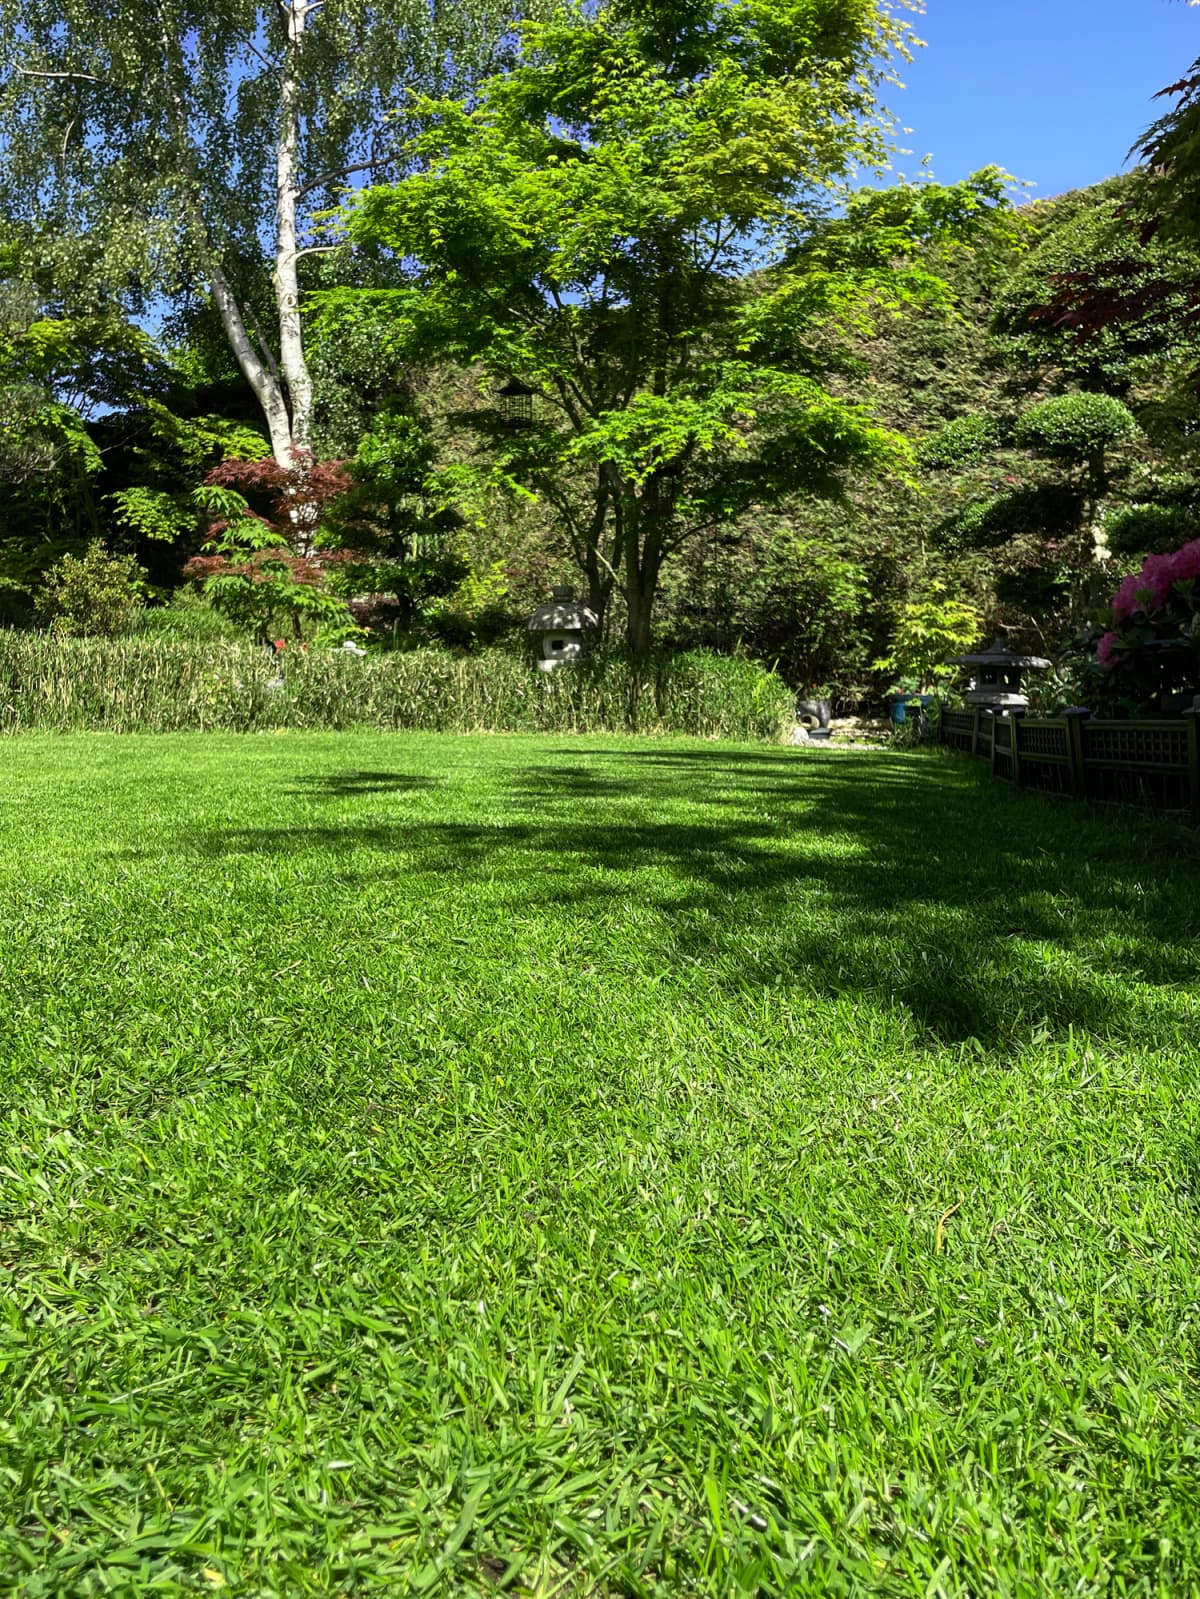 Reseeded lawn with flowering azalea shrubs and Japanese maples